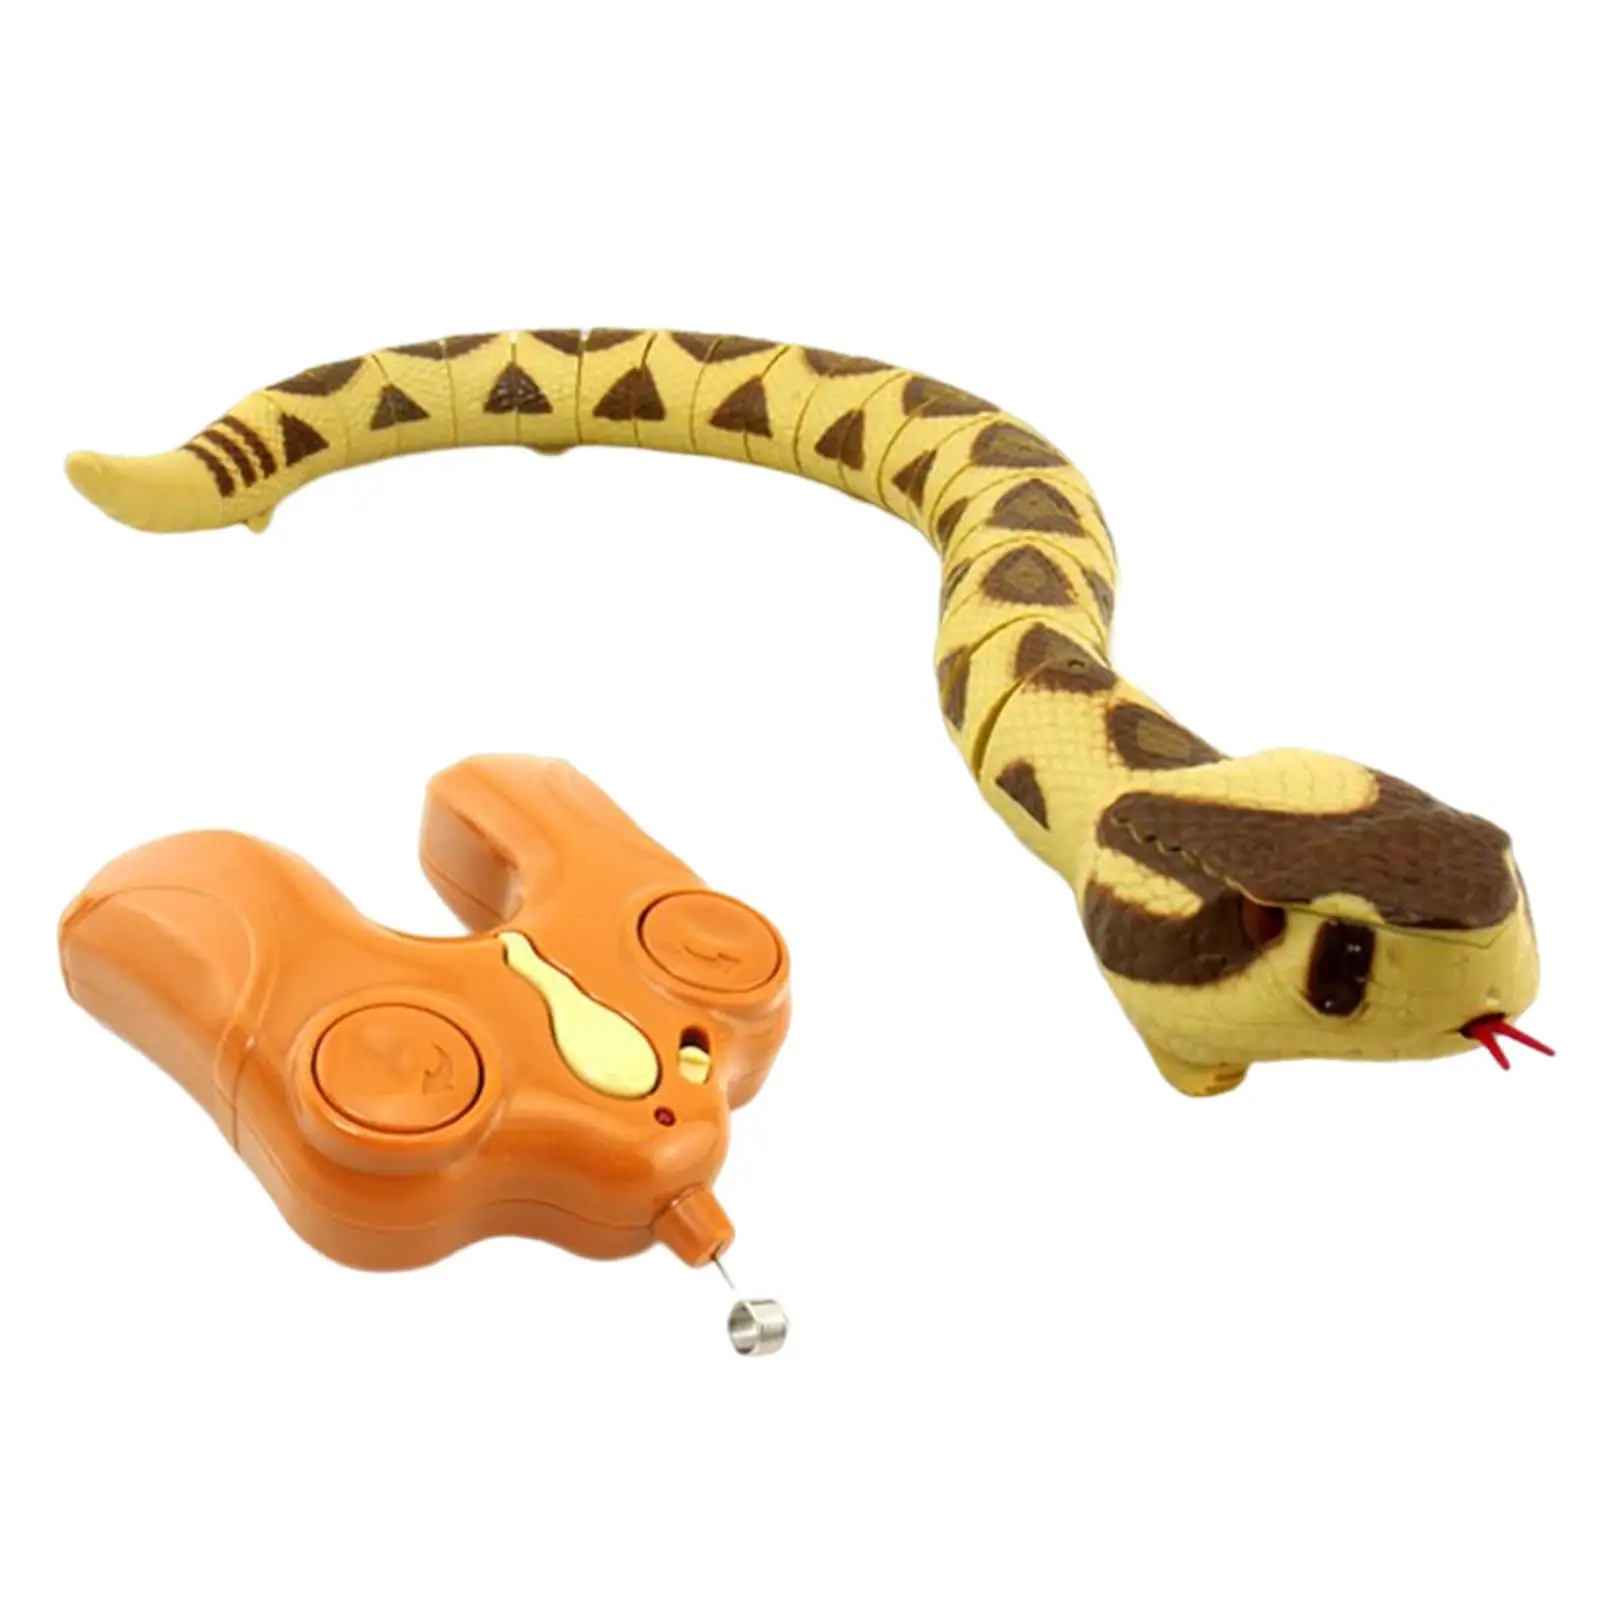 Lifelike RC Snake Toys Artifical Snake Model Halloween Tricks Toy for Party Tabletop Decors Jokes Prop Holiday Gifts